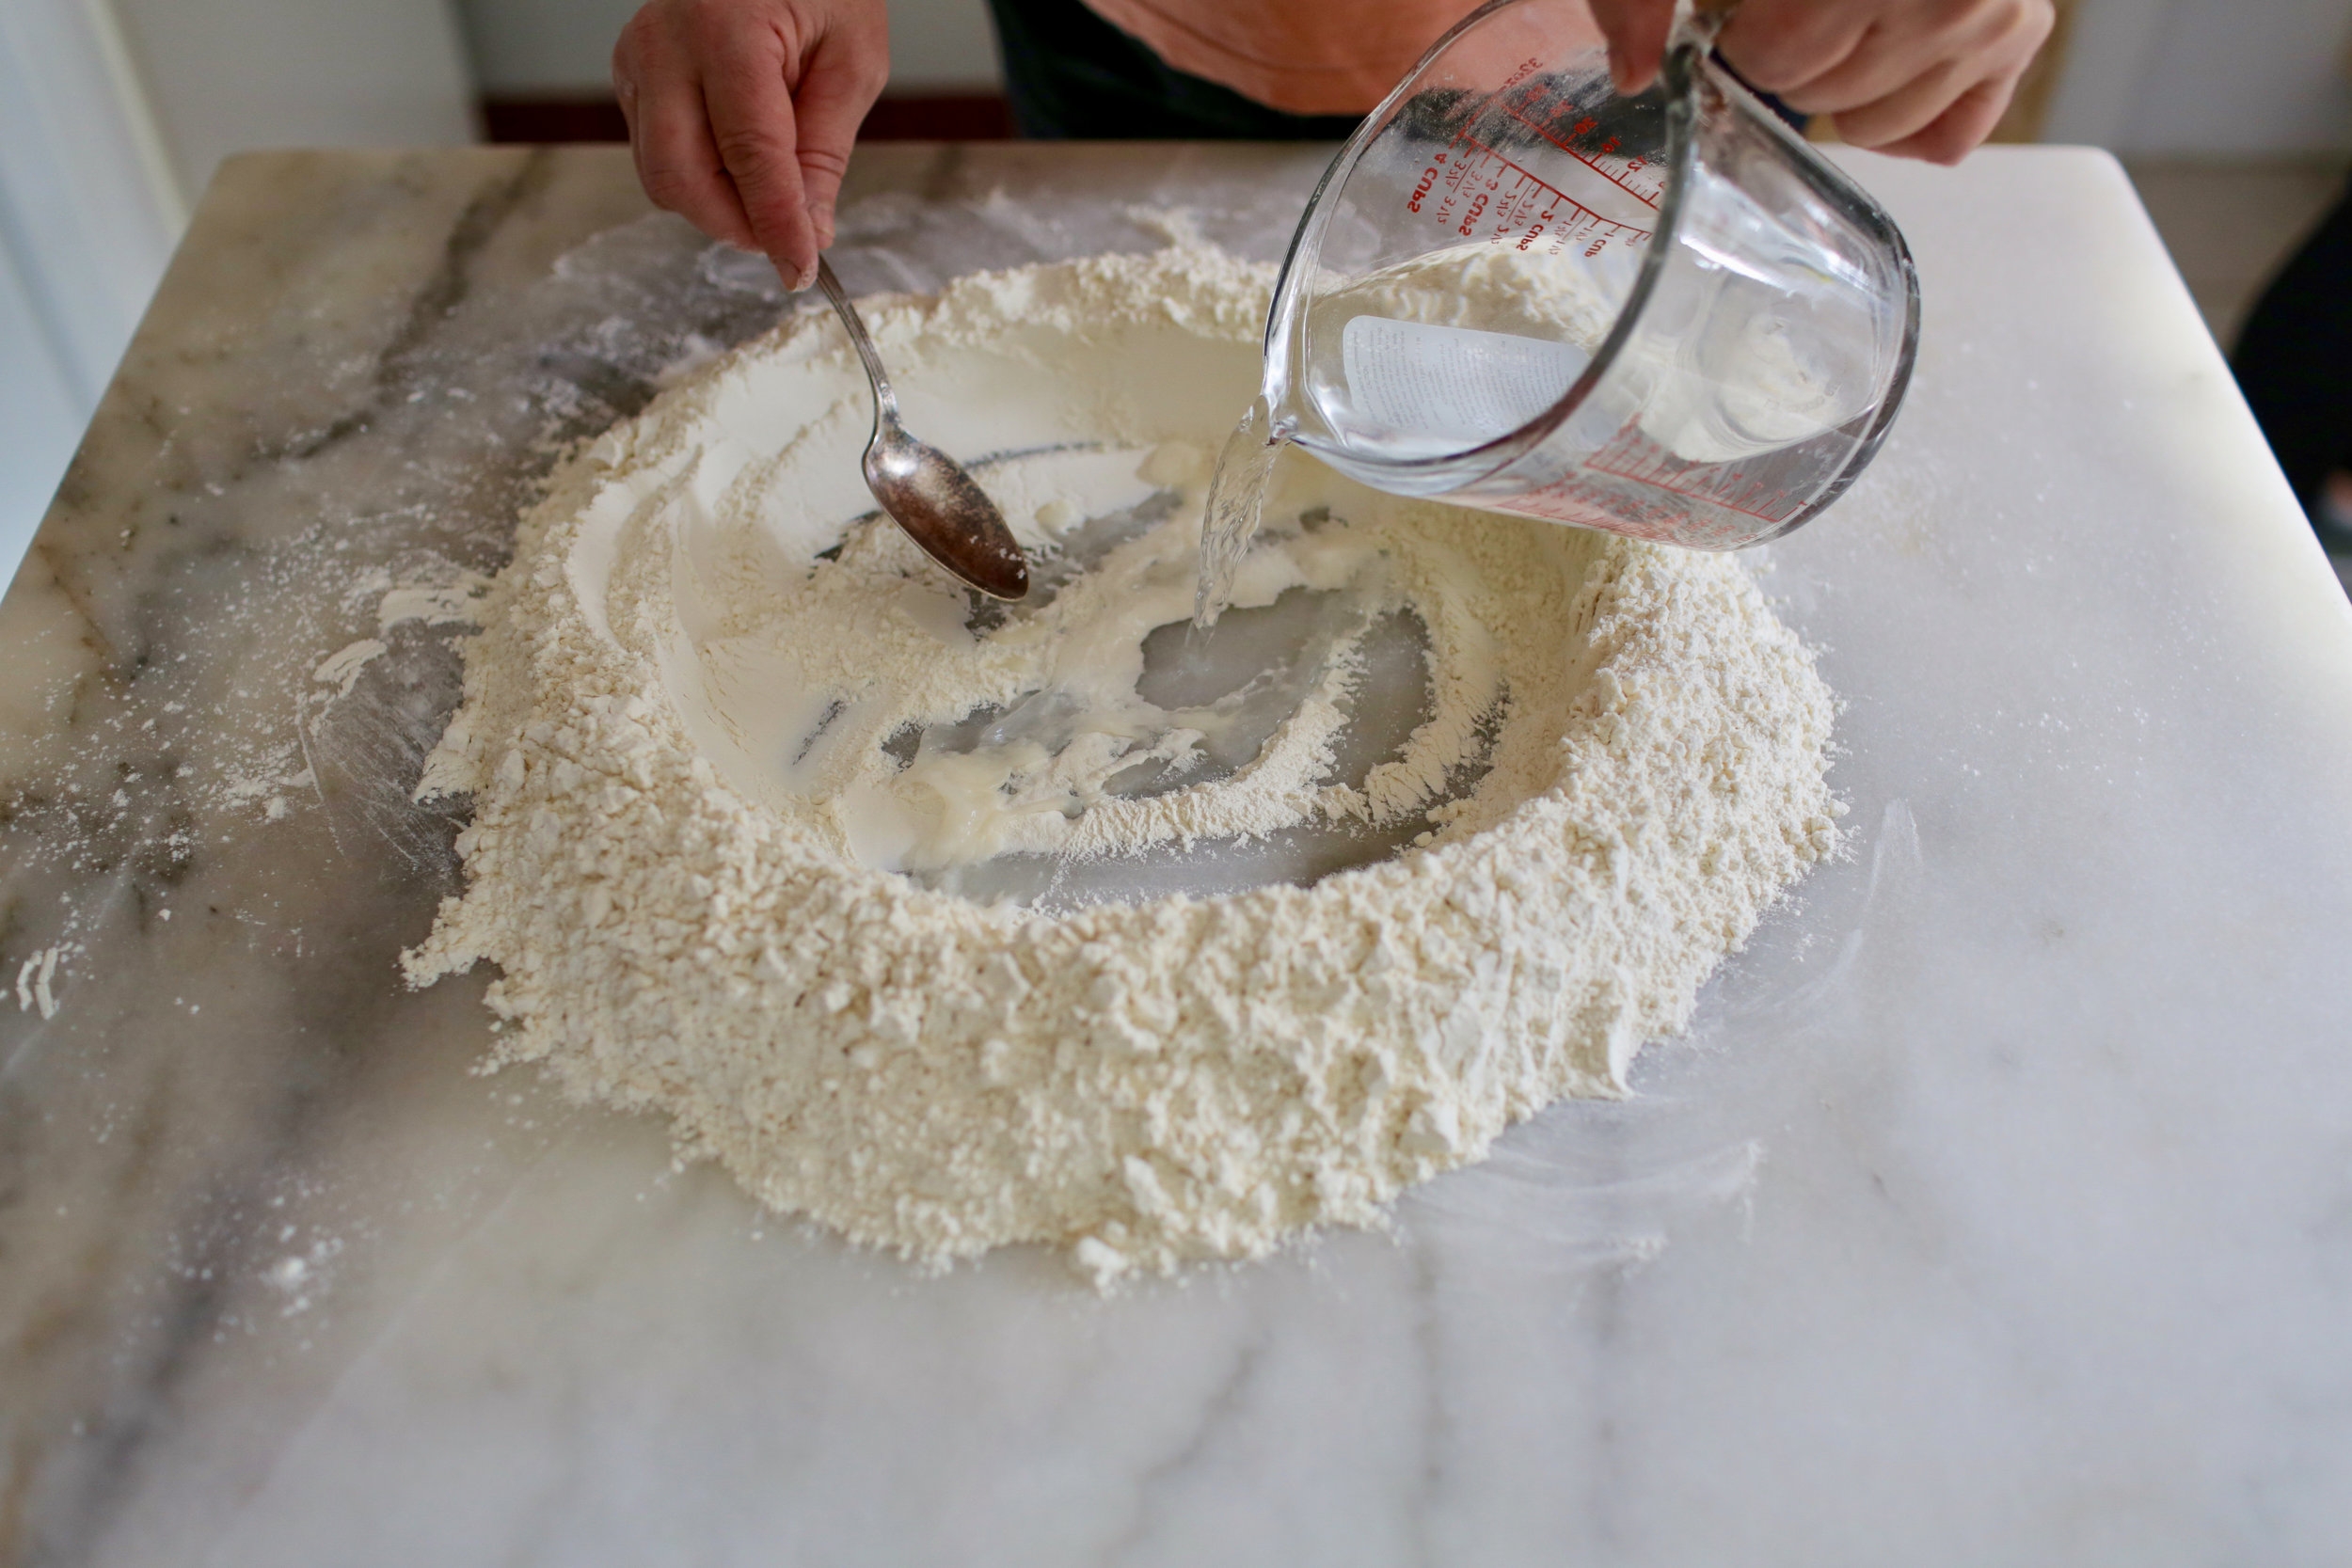  1. For dough, make a well in the flour and add water and salt.&nbsp; 